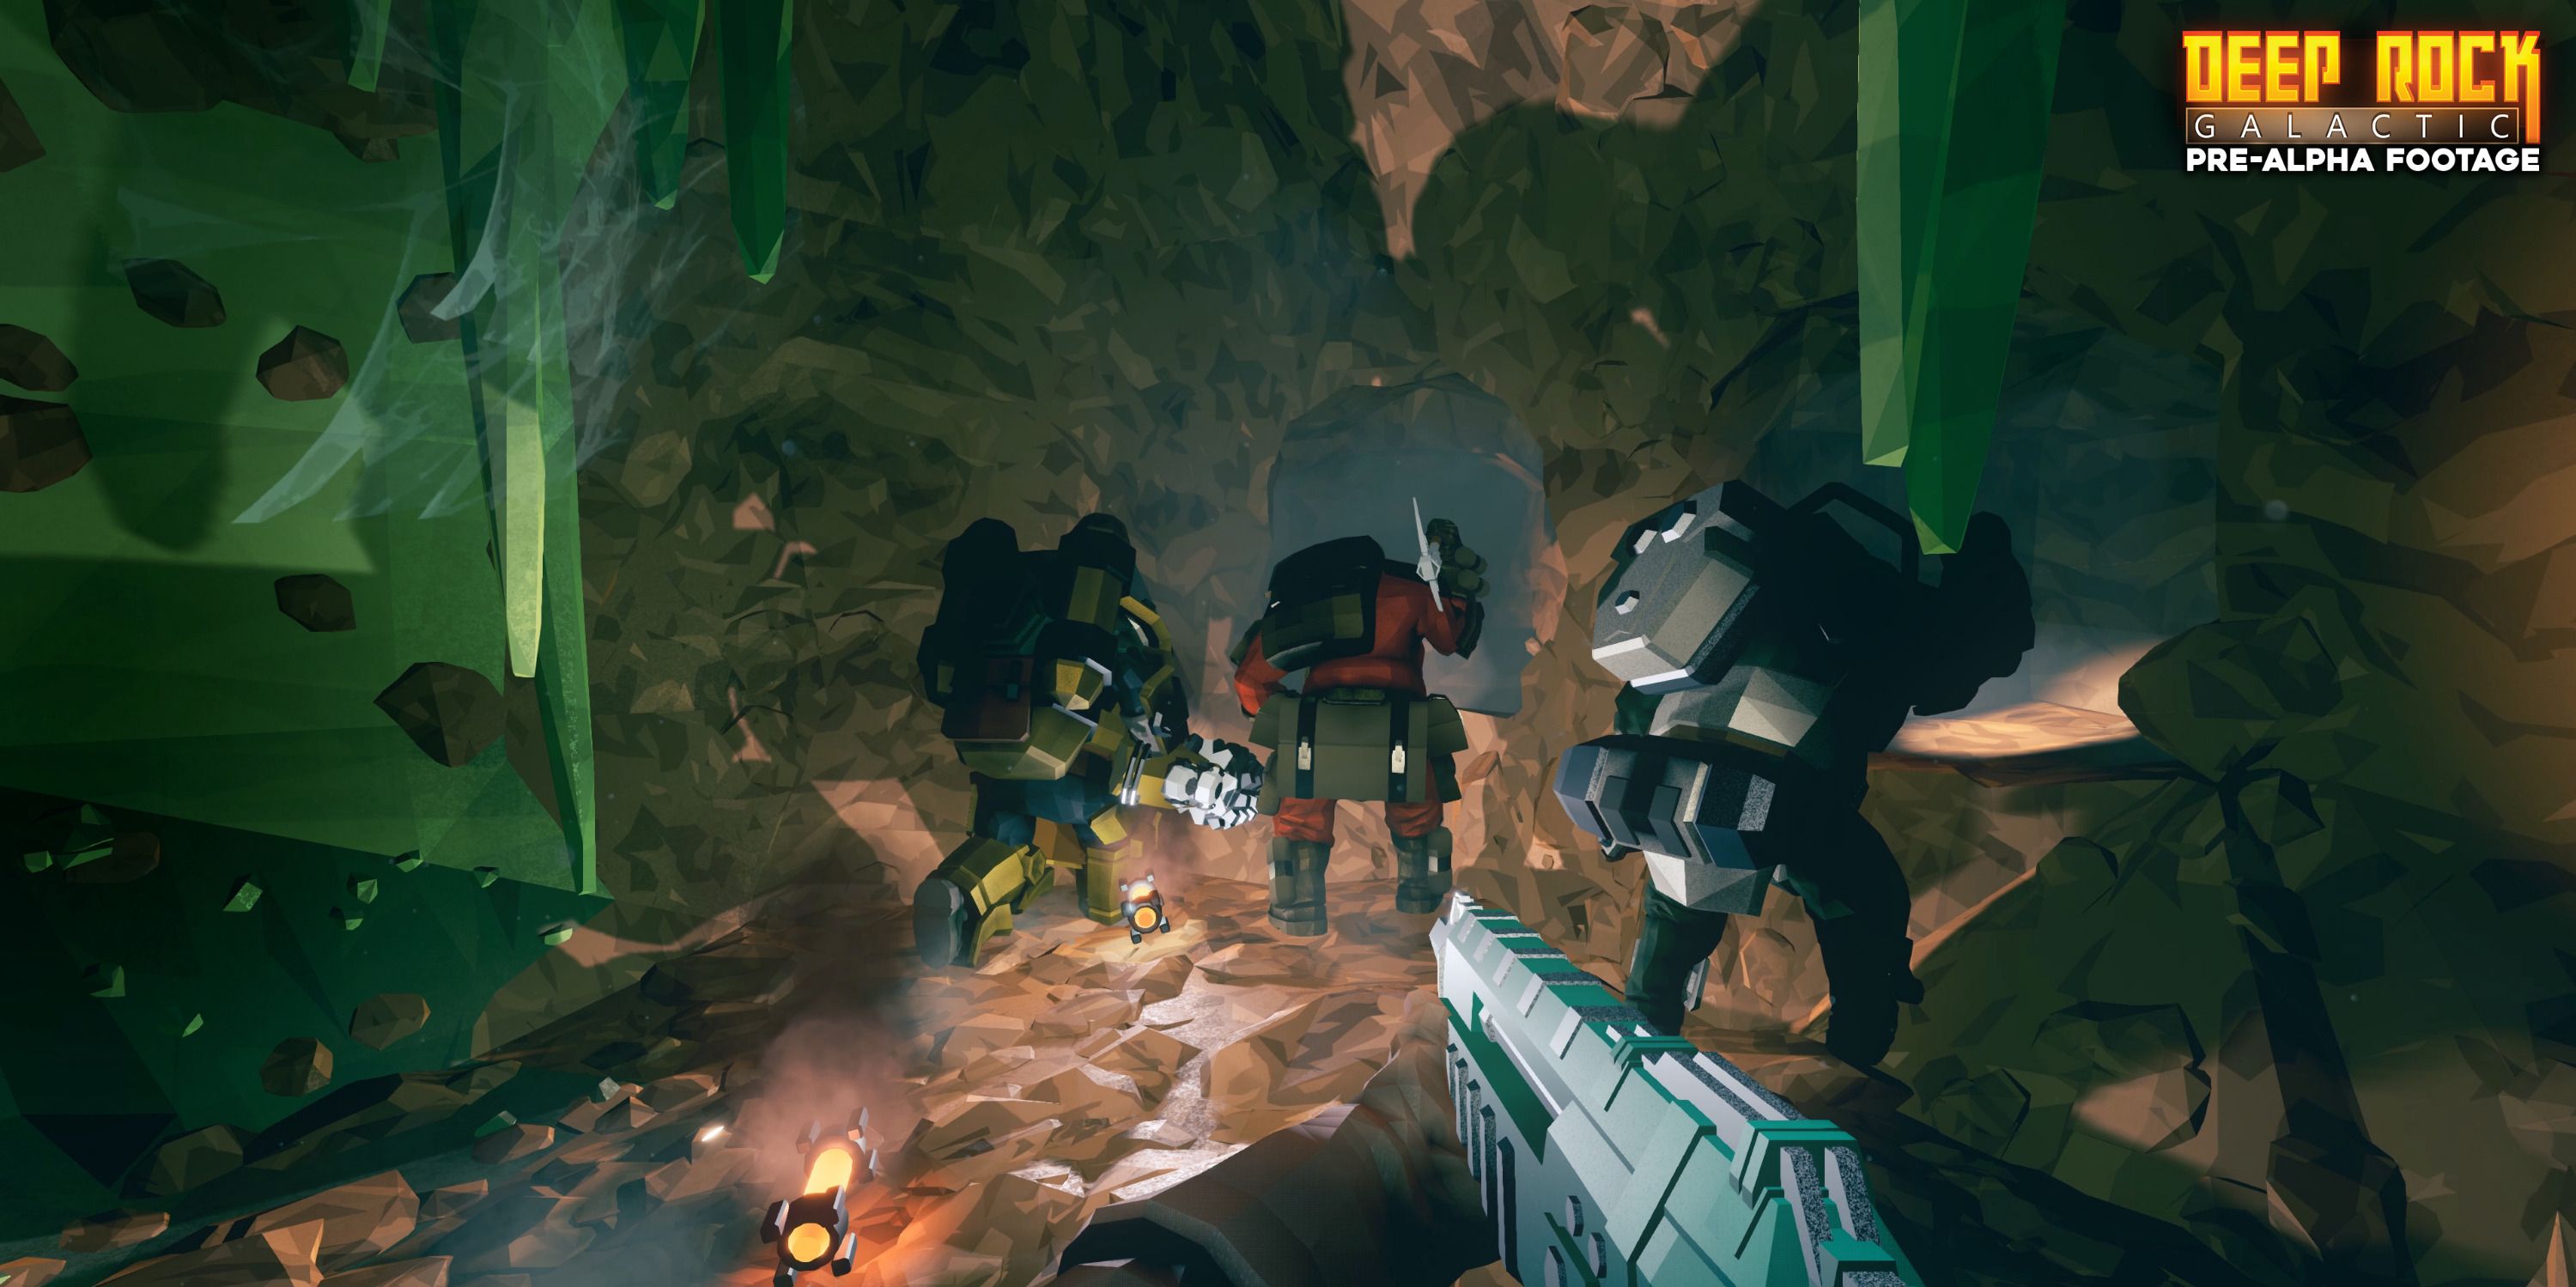 Back View of 3 Dwarf Miners In The Caves.